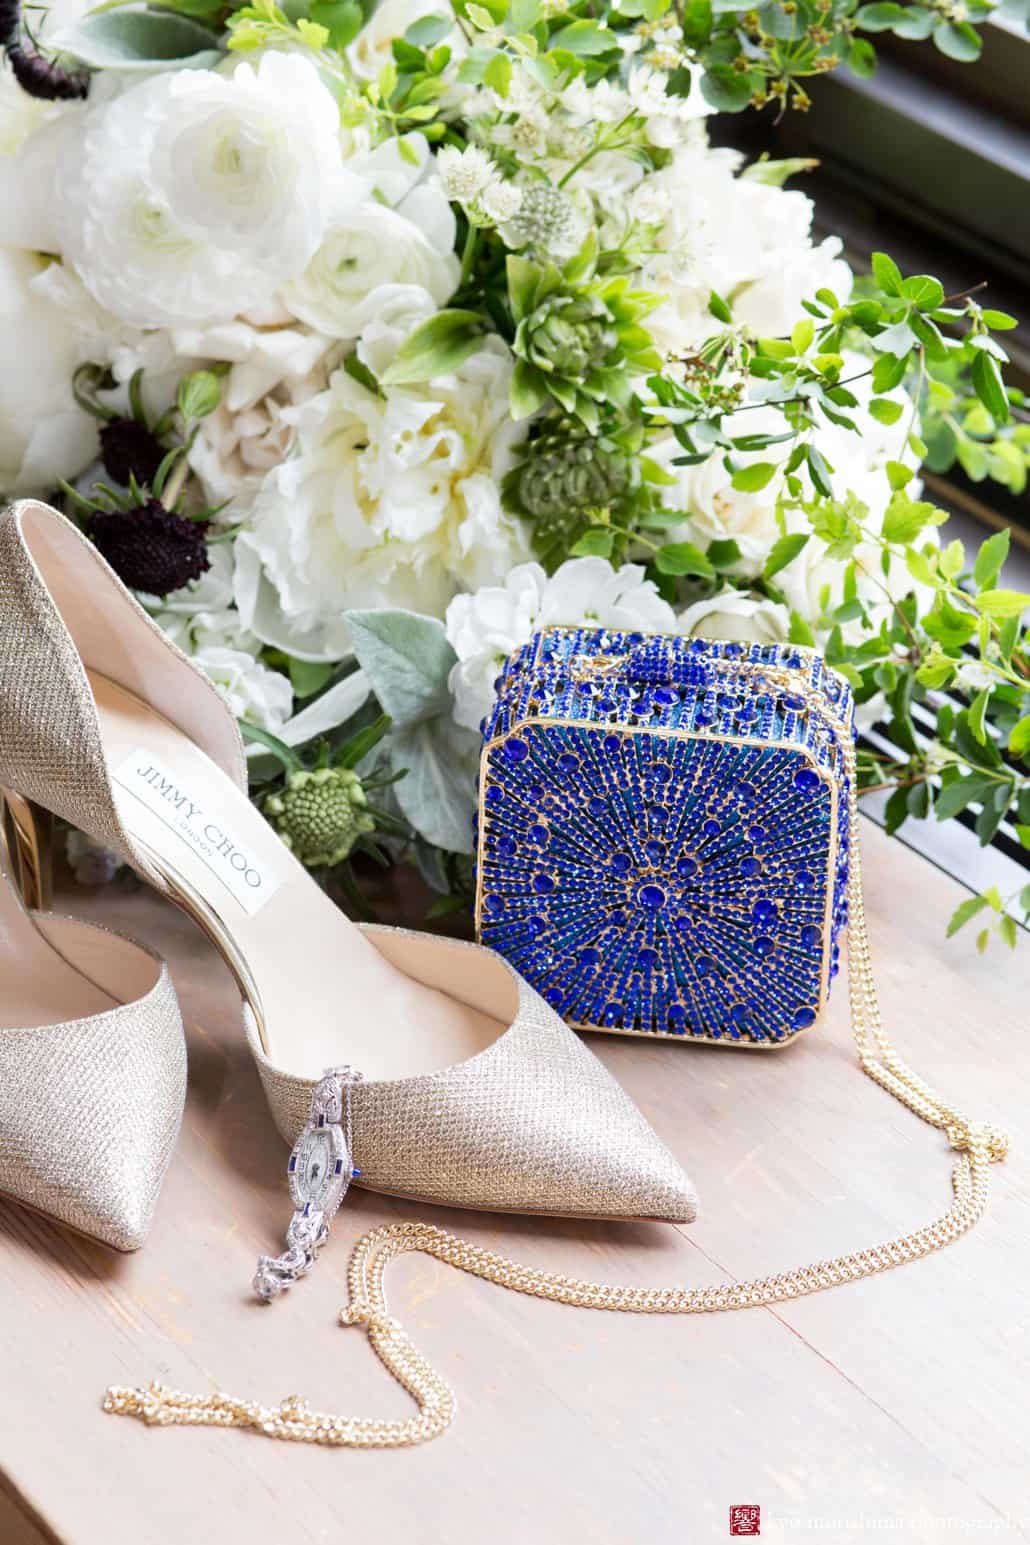 Wedding shoes and evening bag with flowers by Katherine Toland behind them, photographed by Kyo Morishima